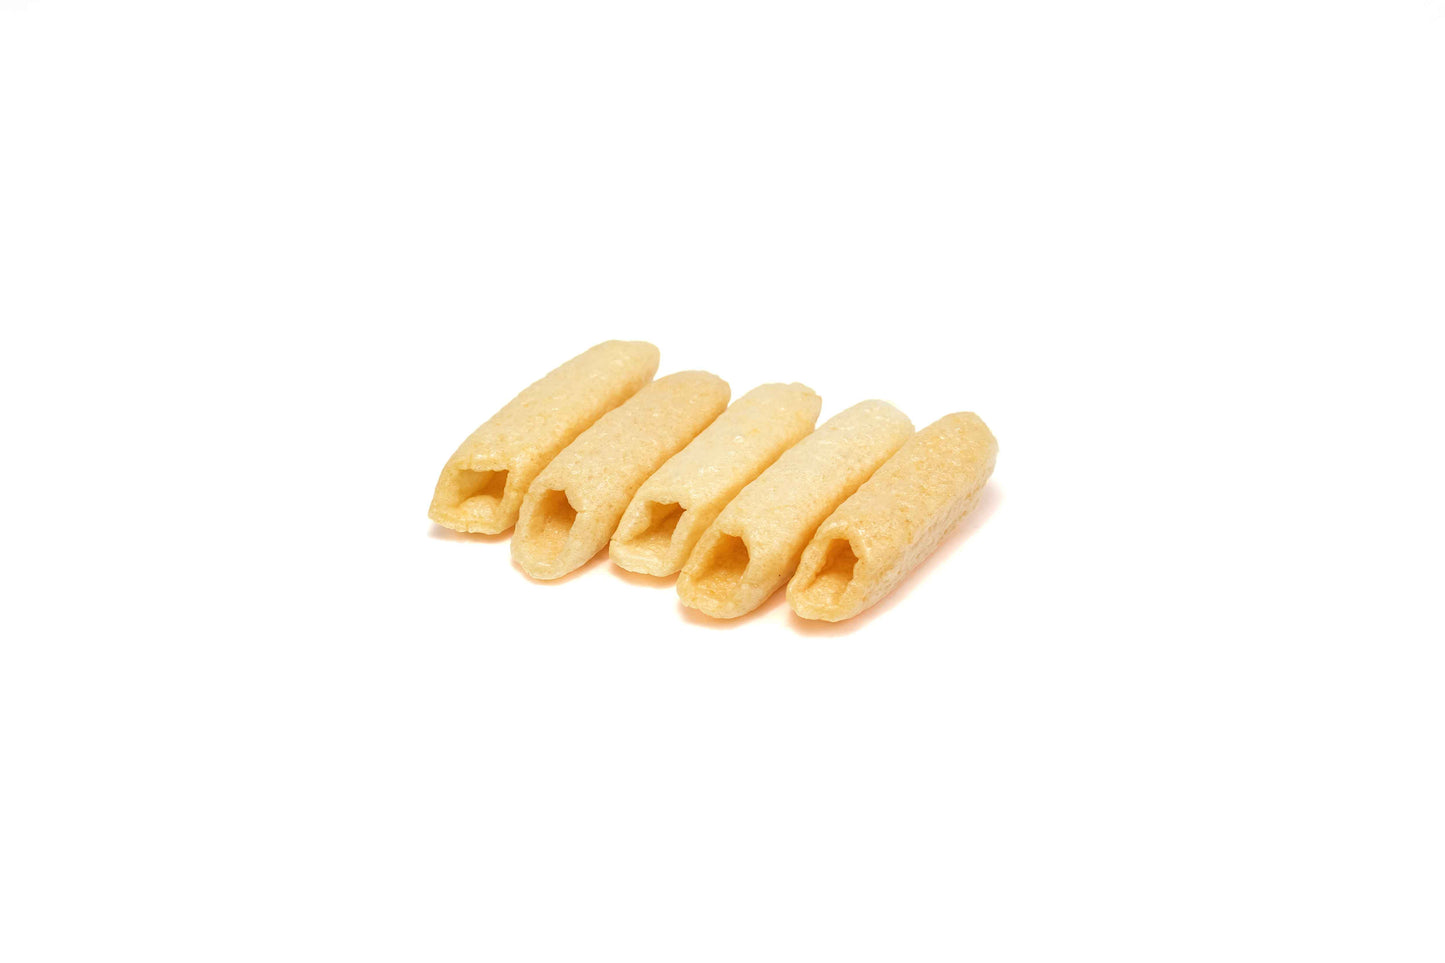 Fried Snacks Cereal Square Tube - Delicious and Crunchy snack. 